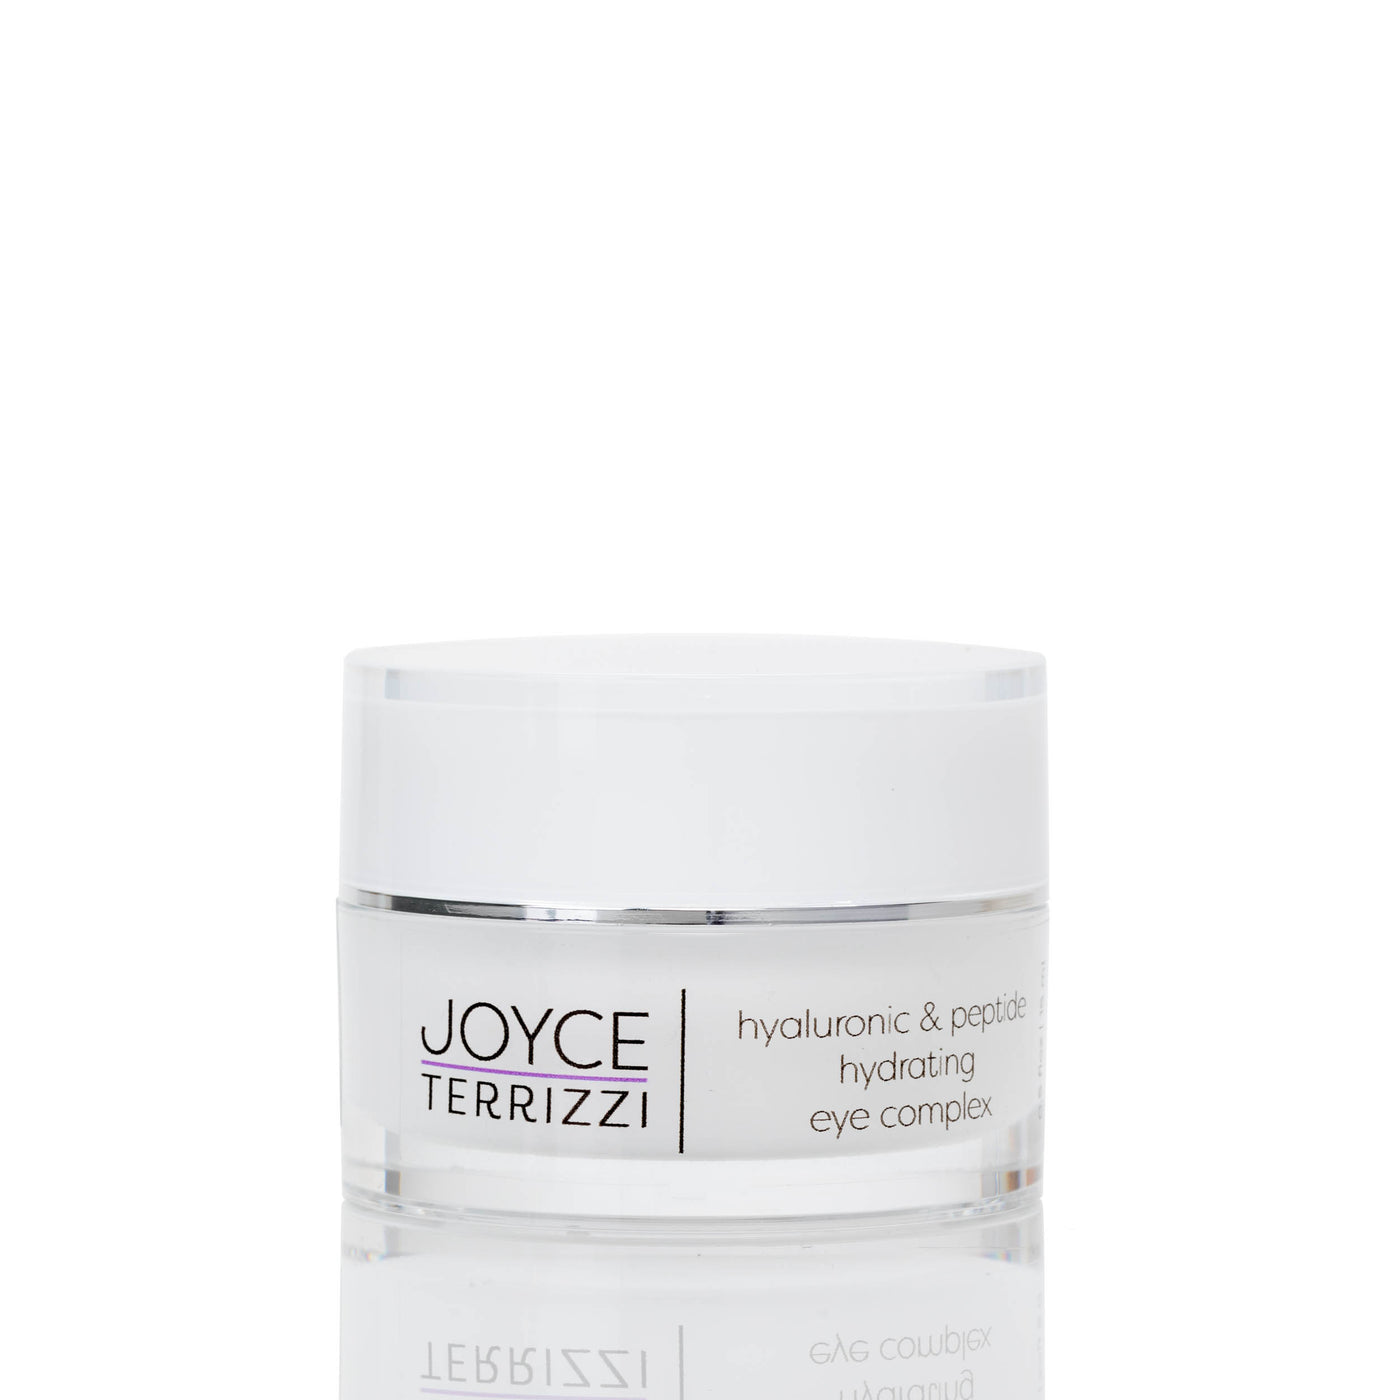 Hyaluronic & Peptide Hydrating Eye Complex